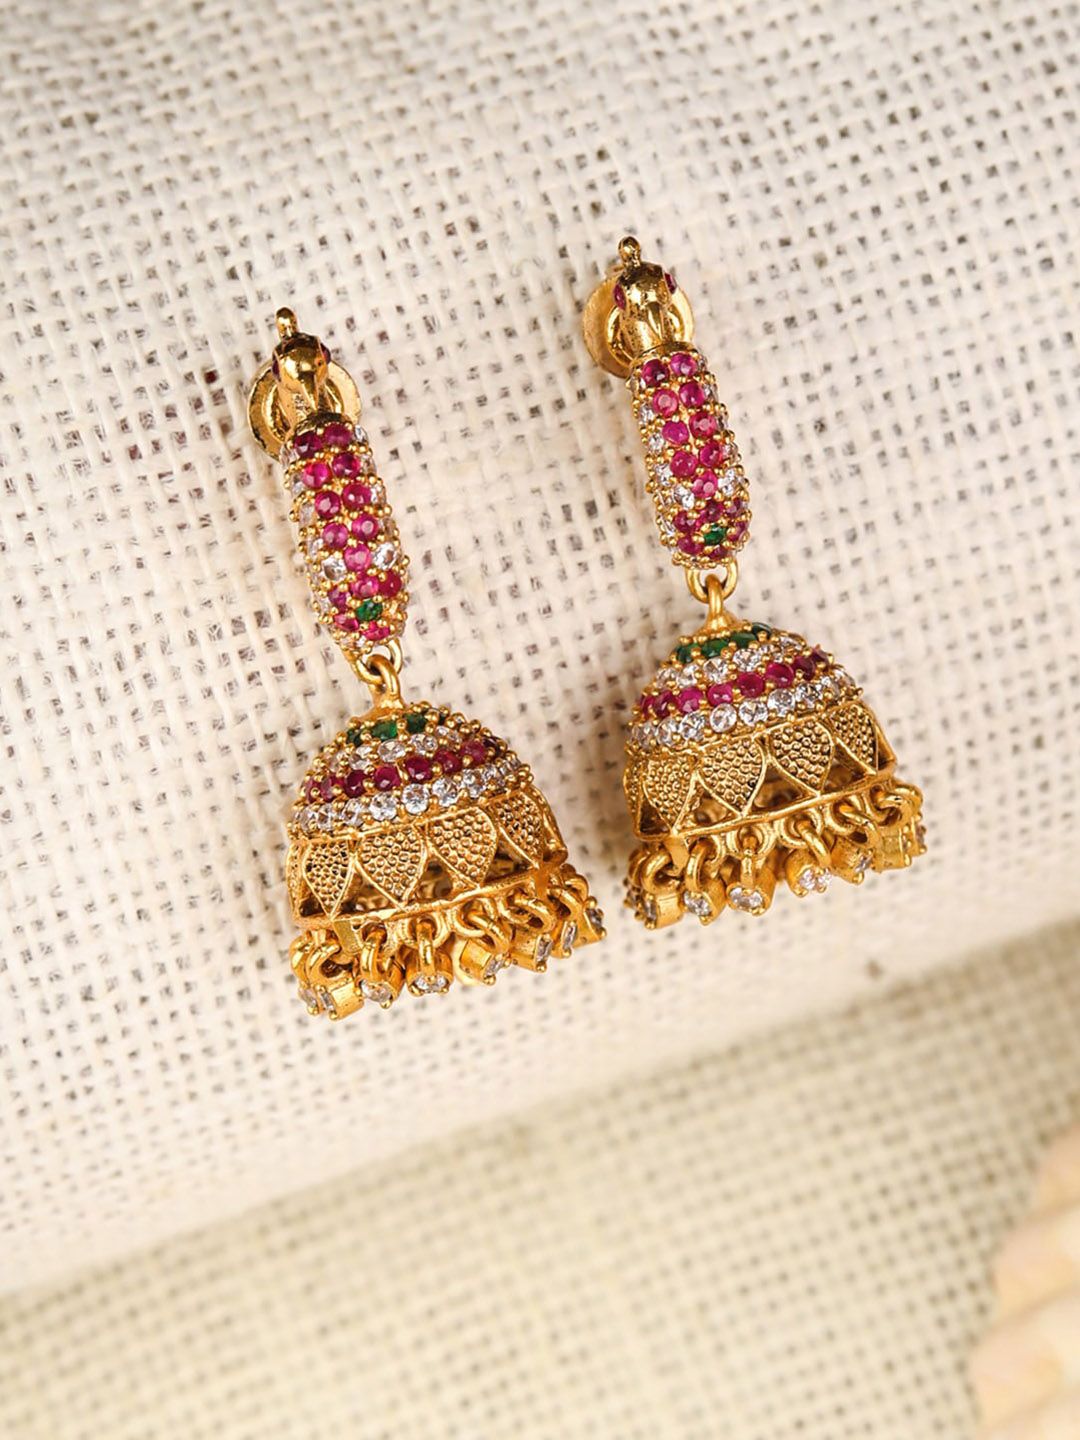 Priyaasi Gold Plated With Pink & Green Color Stones Jhumka Earrings Price in India